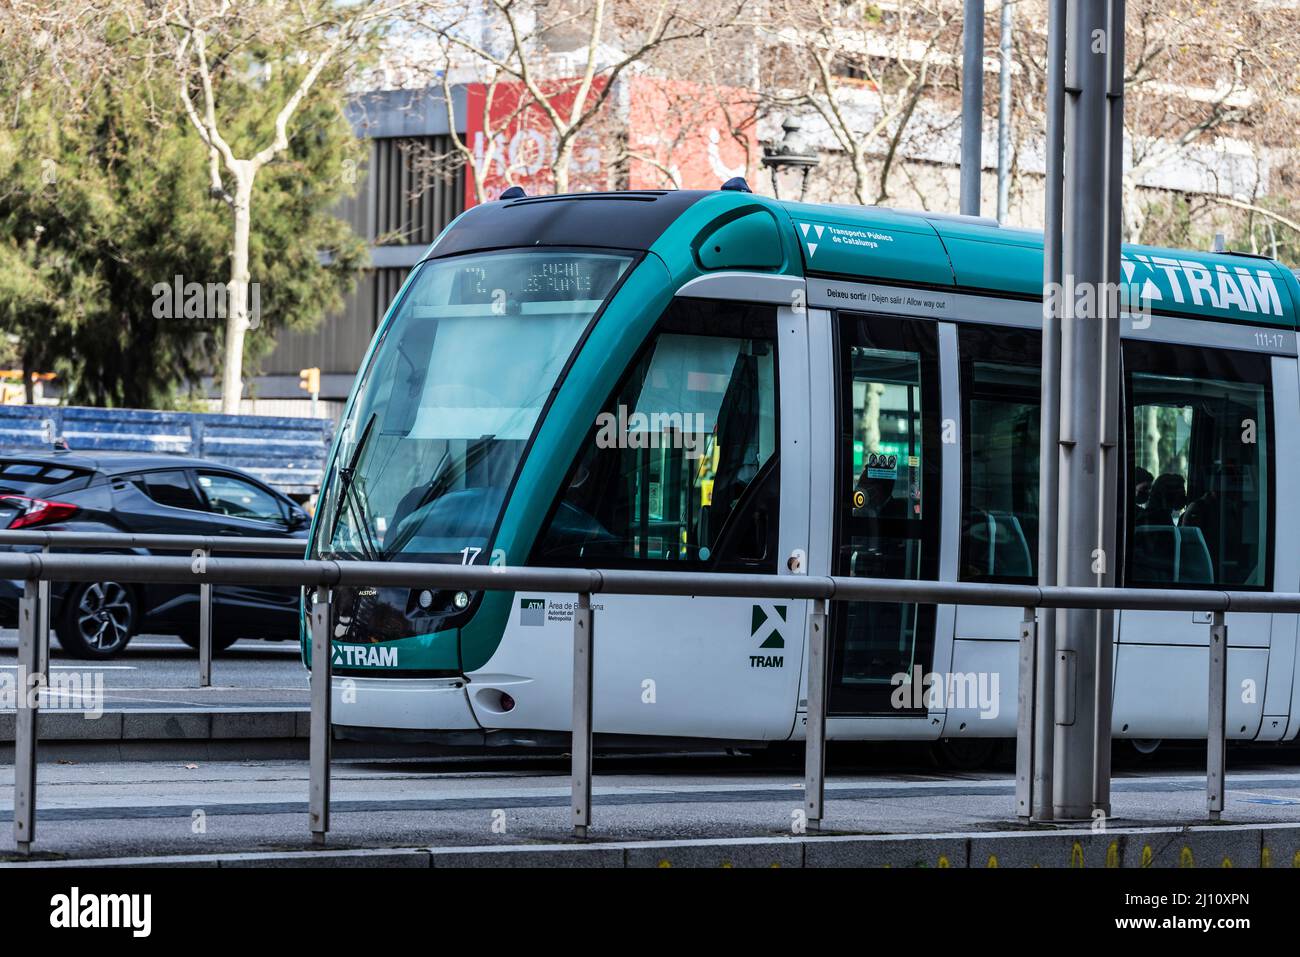 Barcelona, Spain - February 24, 2022: Barcelona tram known as Trambaix. In the picture the tram is going through the Diagonal avenue in Barcelona, Cat Stock Photo